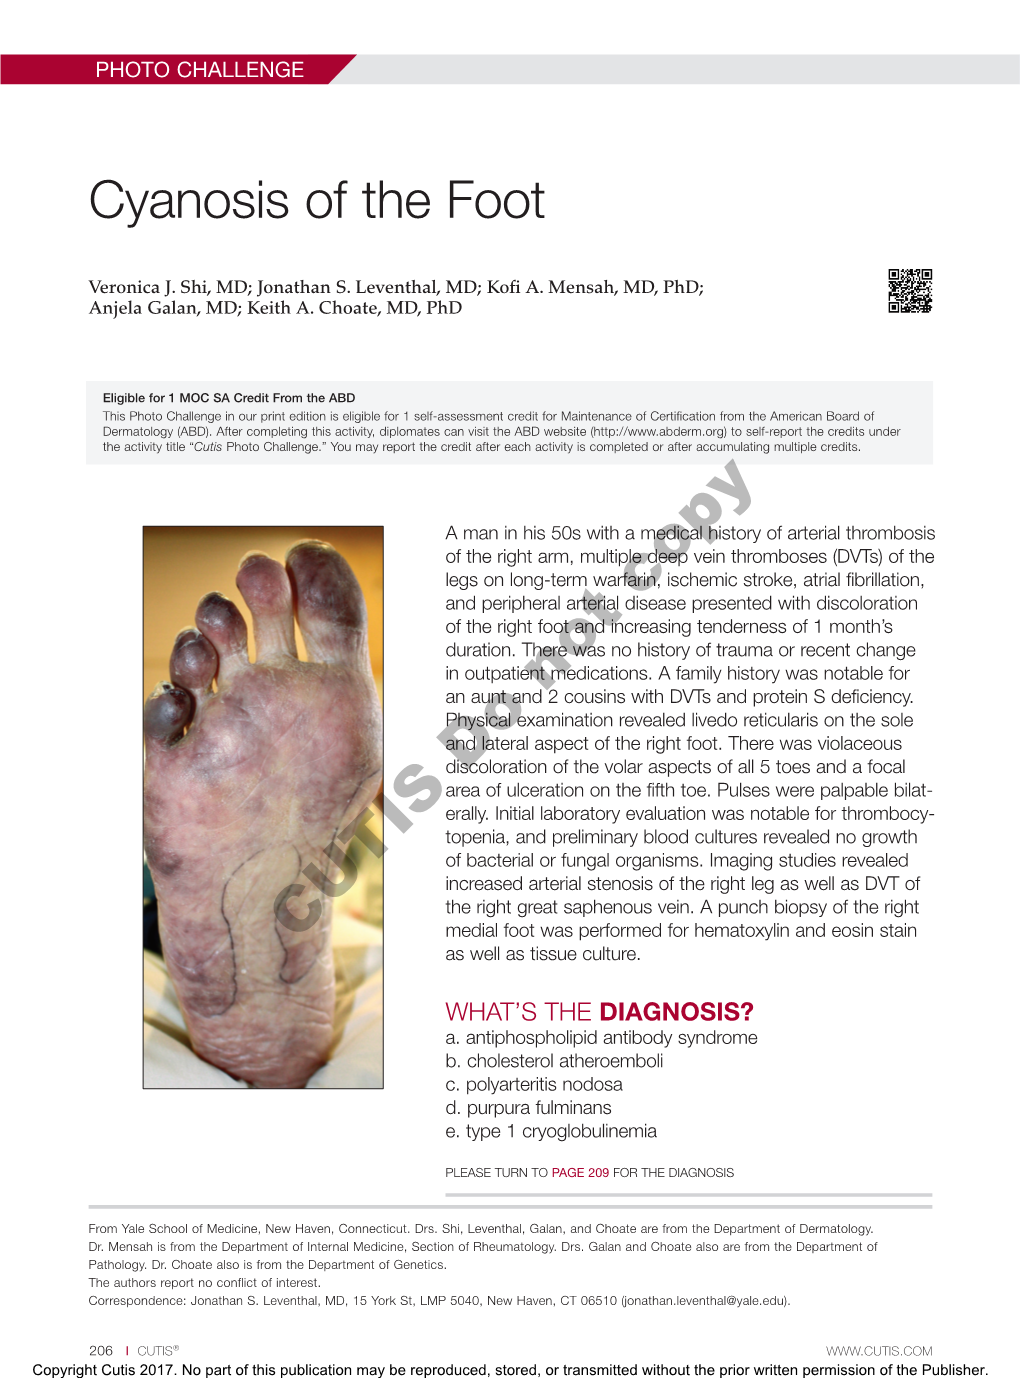 Cyanosis of the Foot